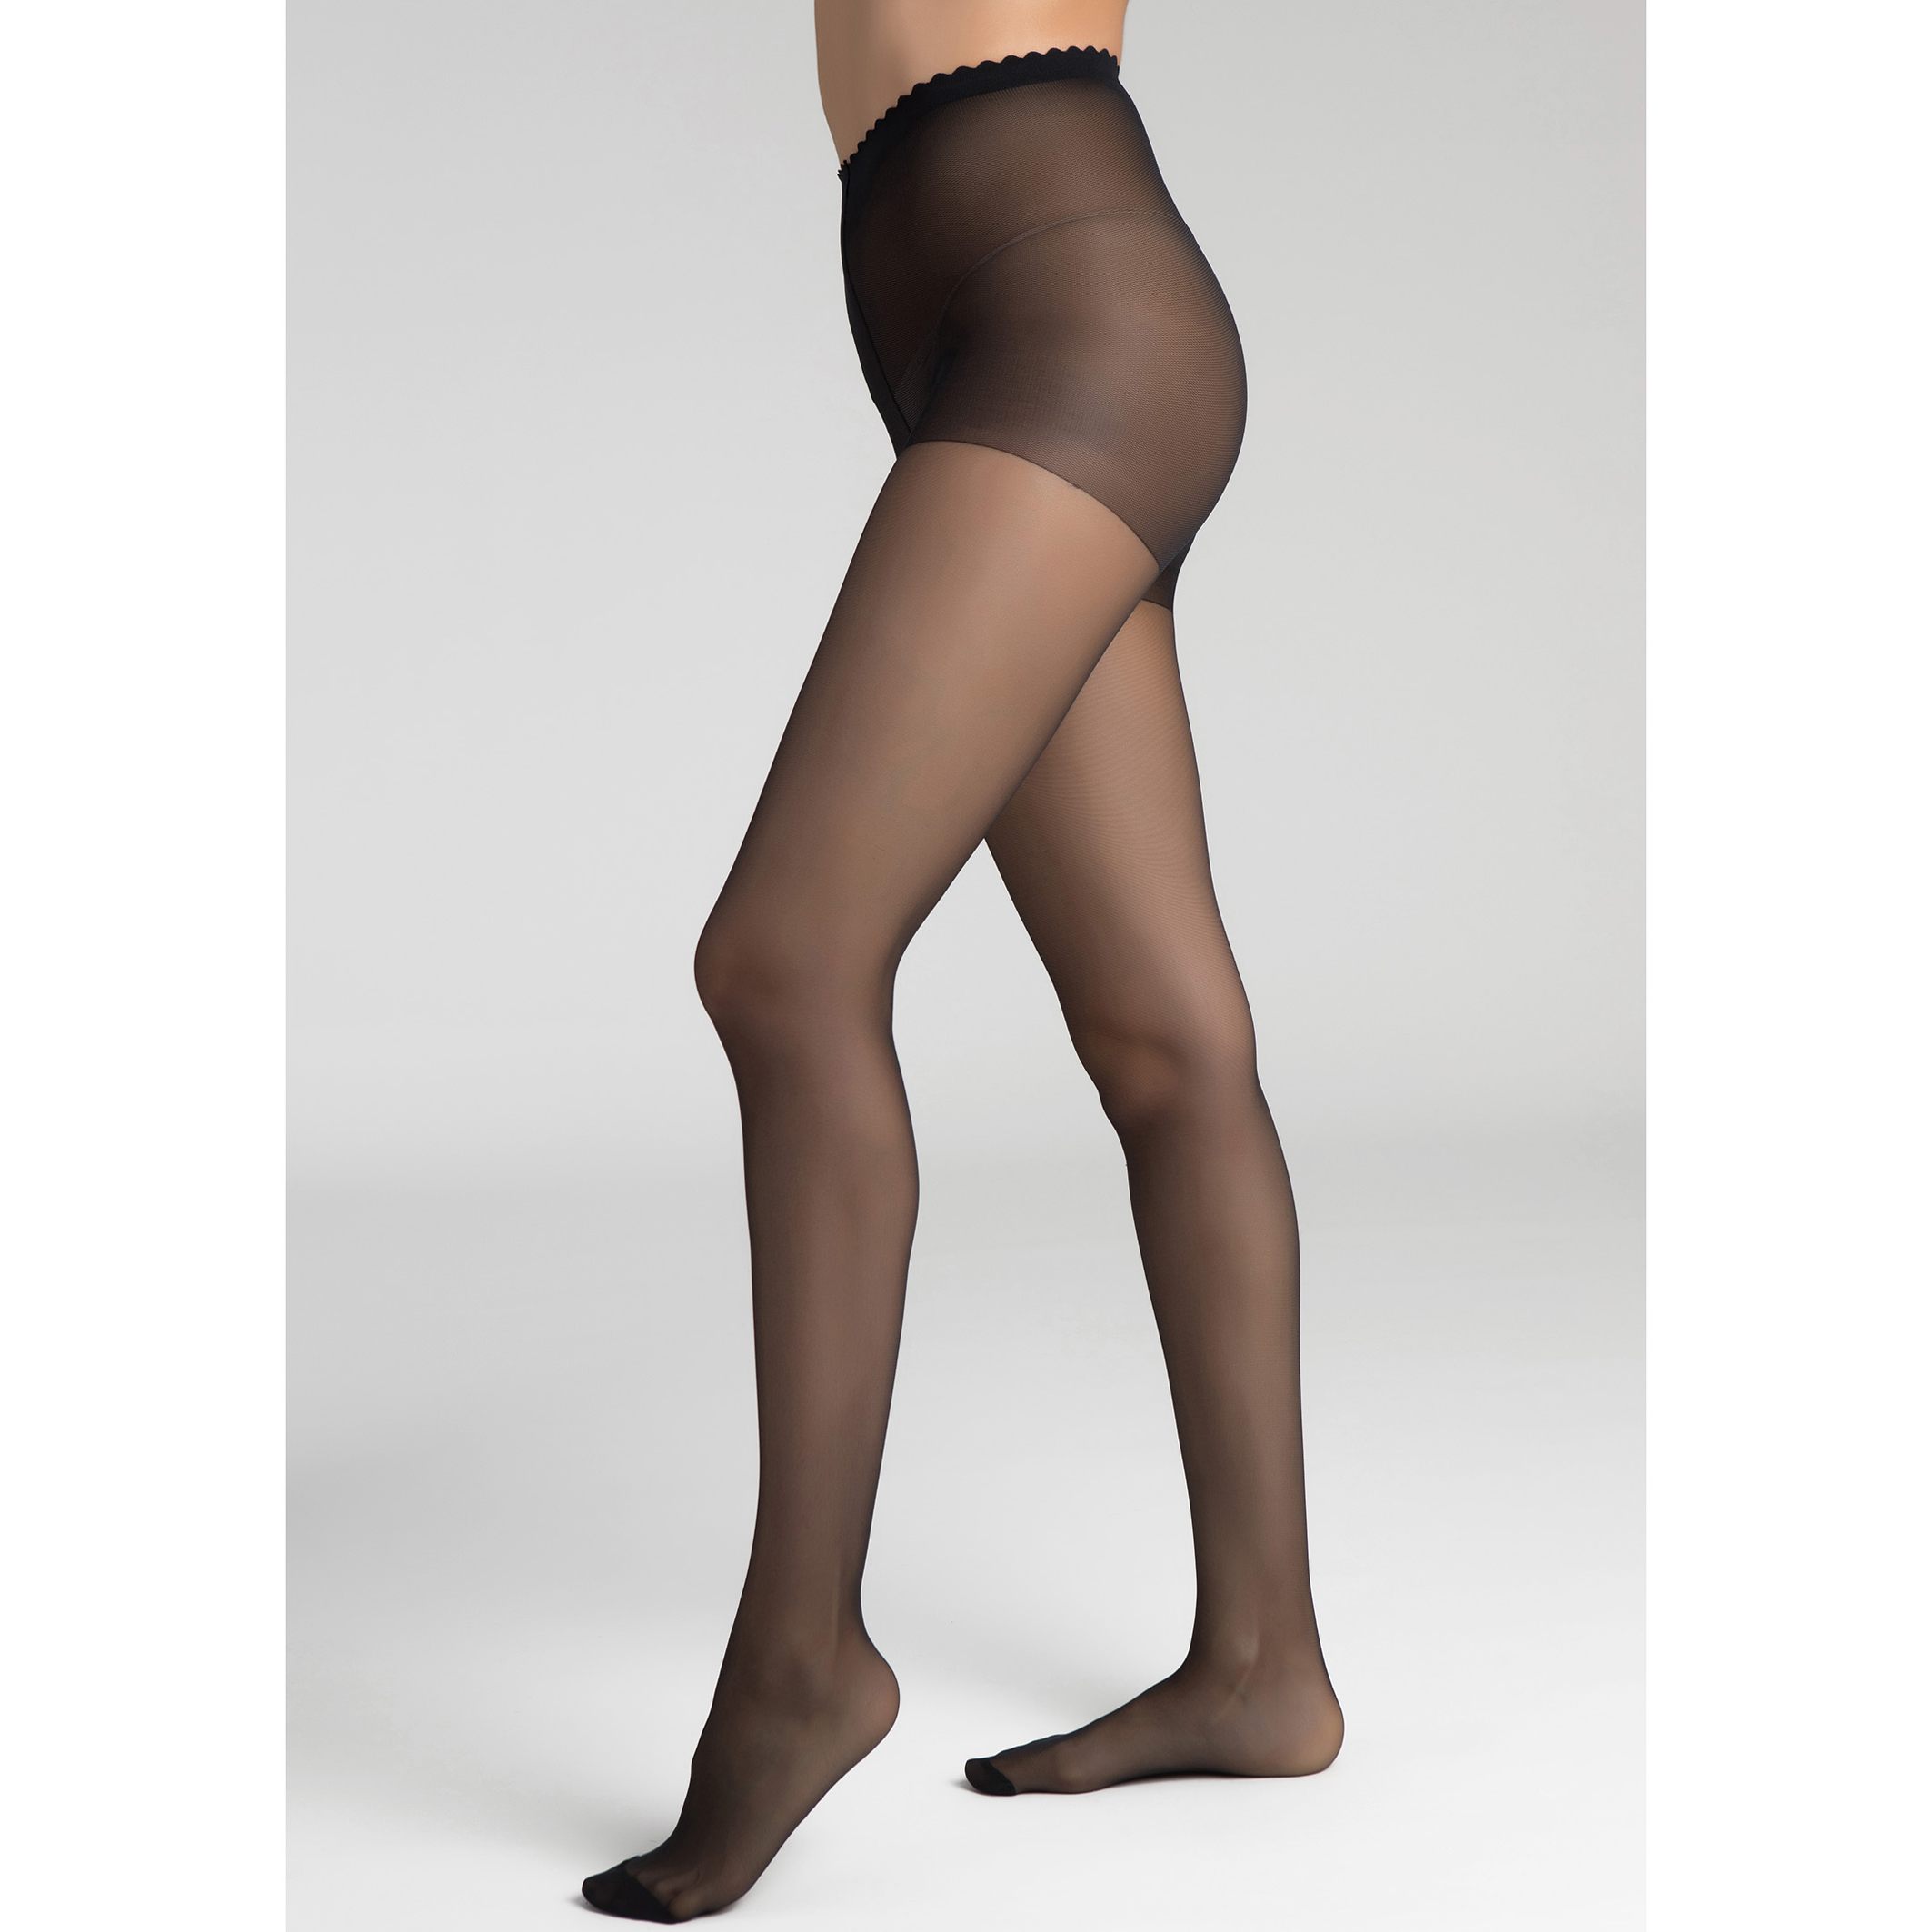 Seamless Pantyhose Pictures